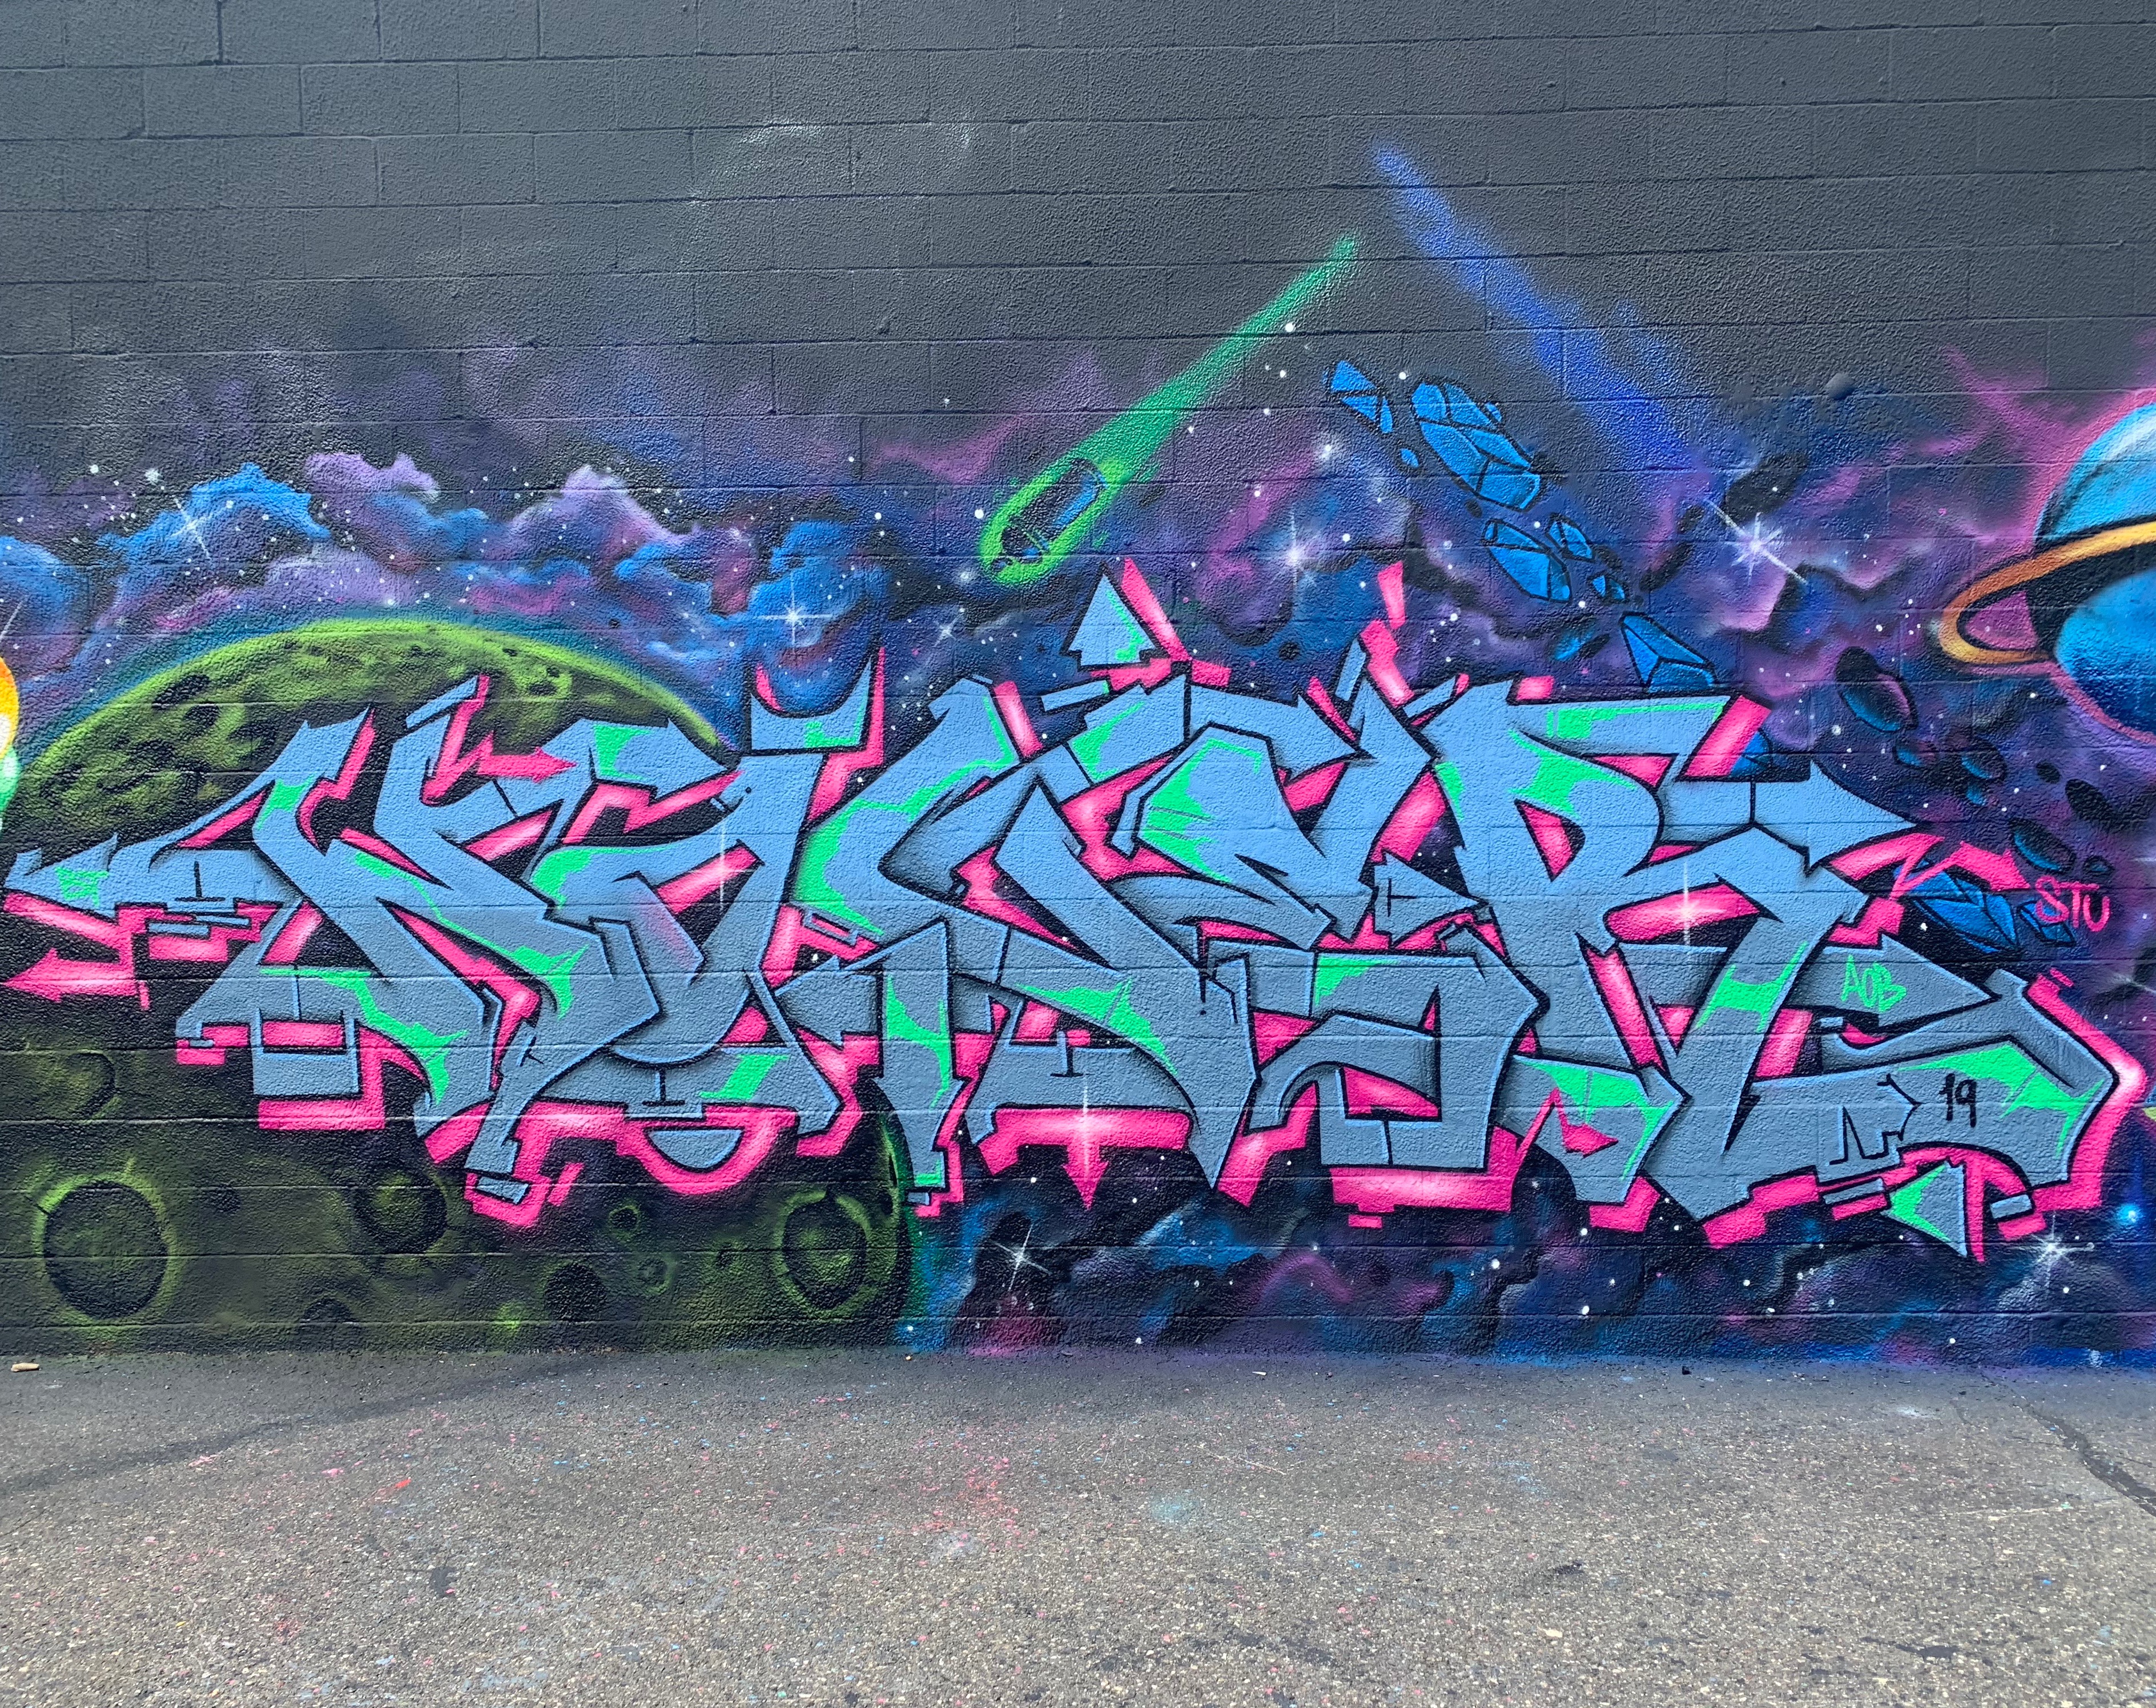 NOVER, BT Wall in Paterson, NJ. 2019.